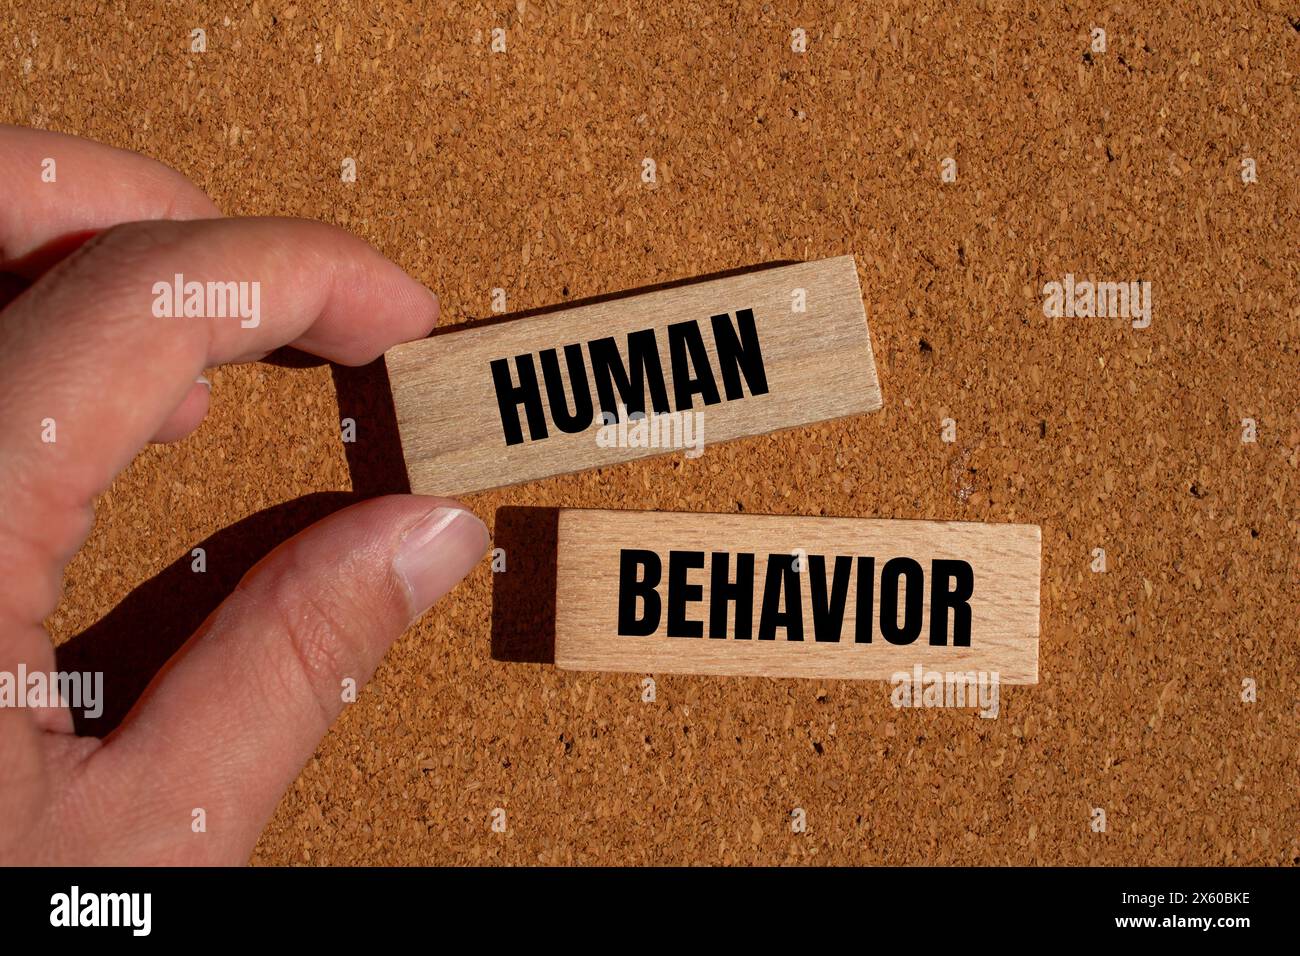 Human behavior words written on wooden blocks with brown background. Conceptual human behavior symbol. Copy space. Stock Photo